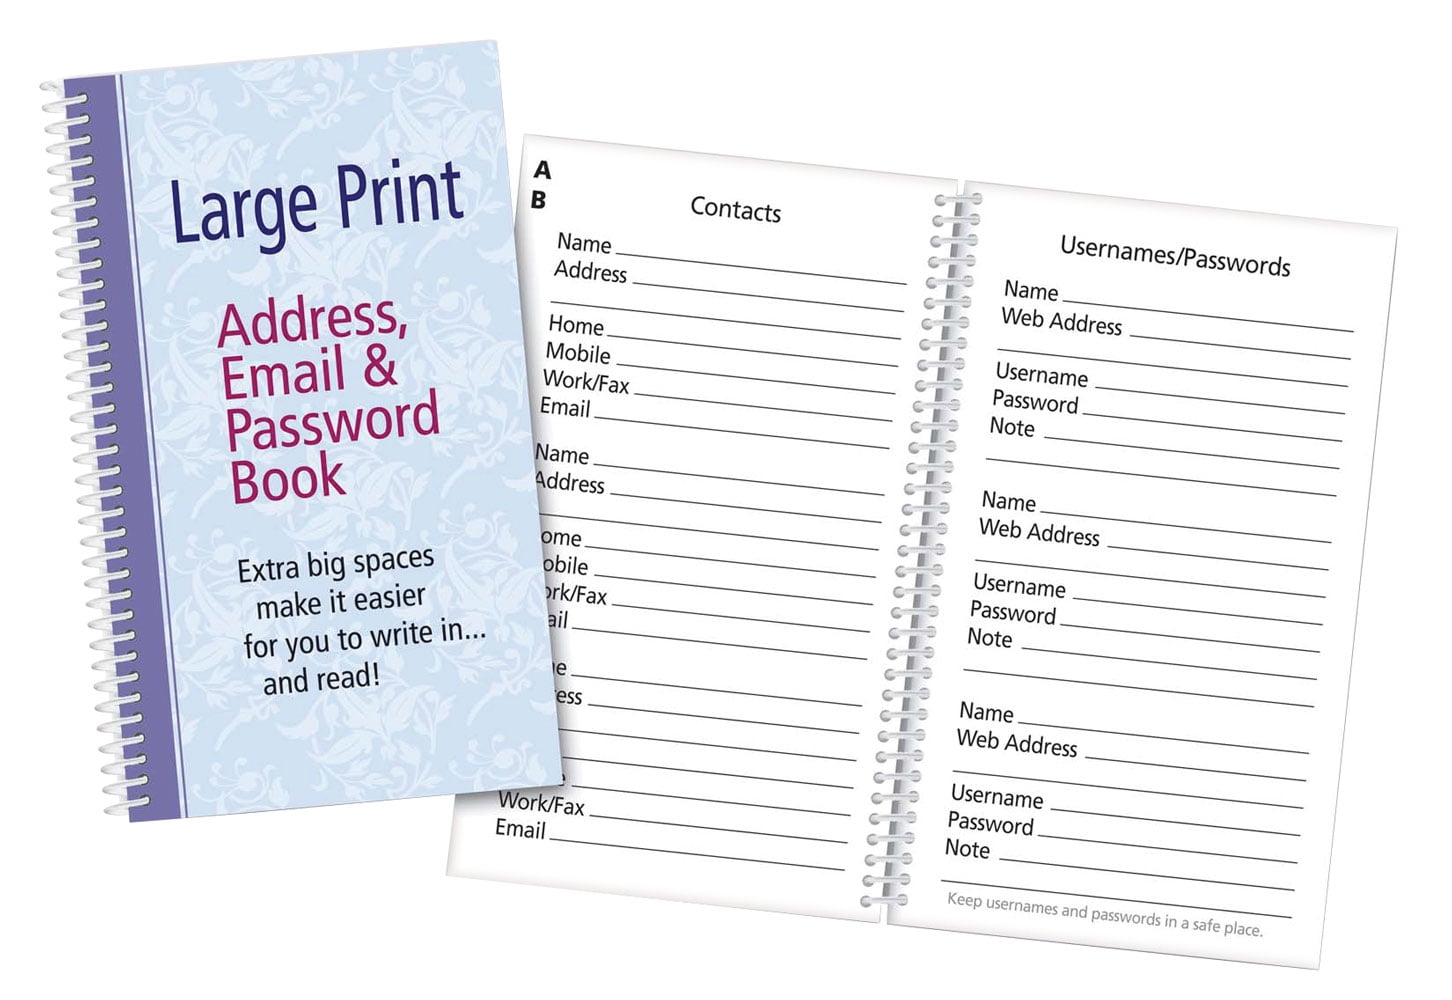 Large Print Products Large Print Address Book